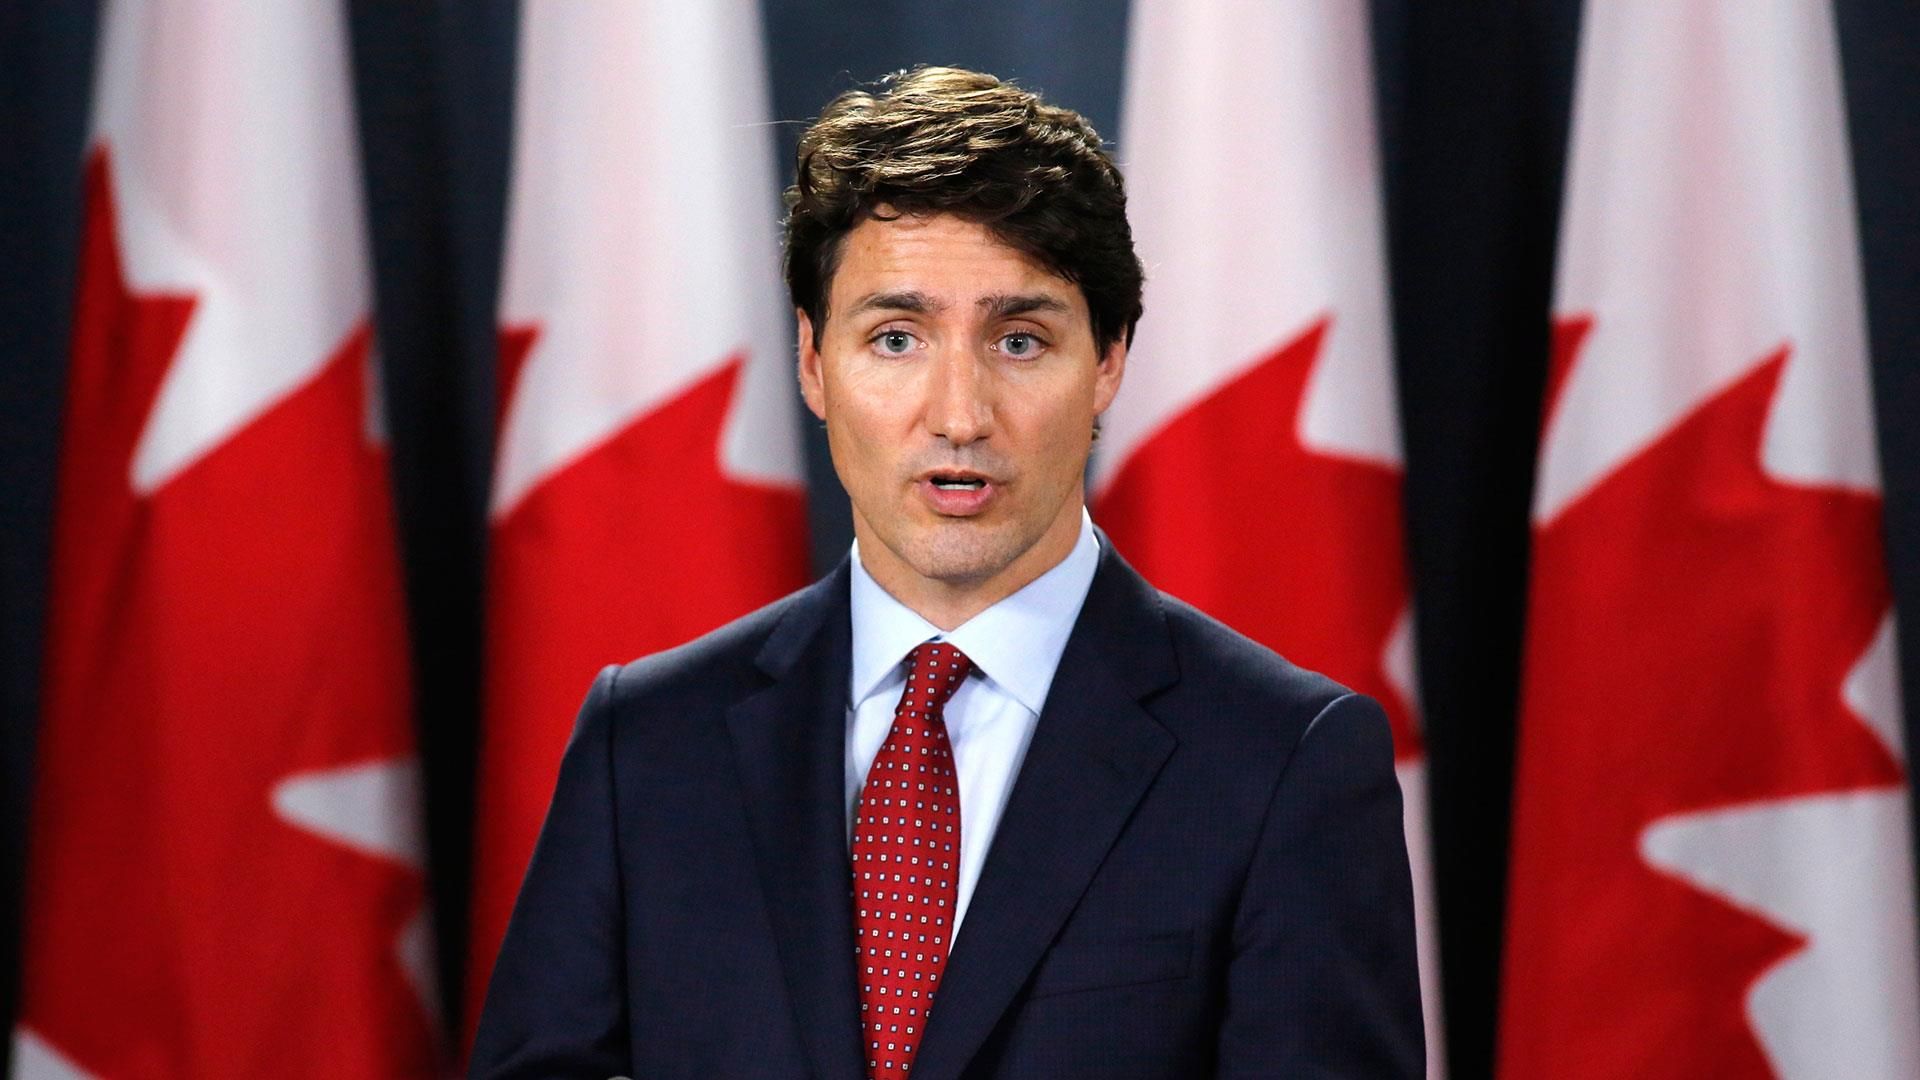 Canadian Prime Minister Justin Trudeau responds to Trumps new tariffs on steel and aluminum